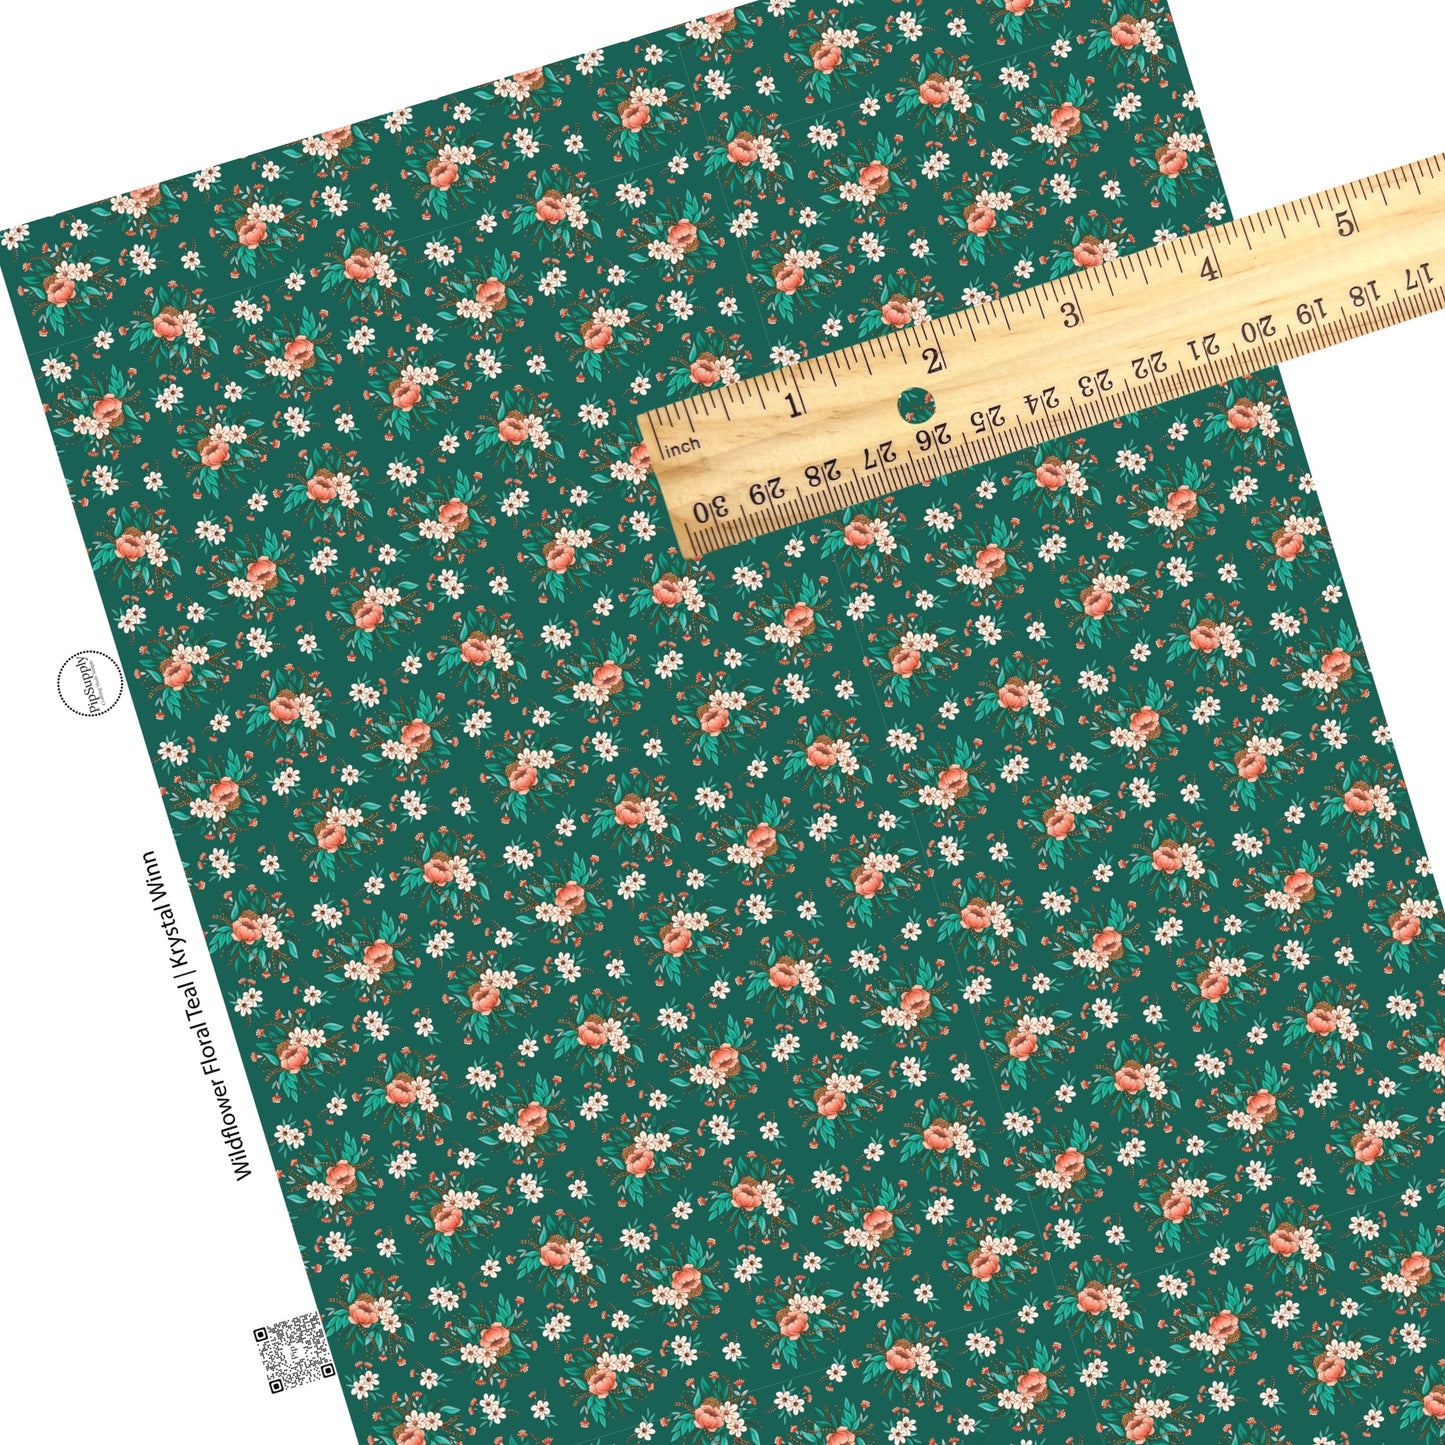 cream flowers with peach flowers on teal faux leather sheets